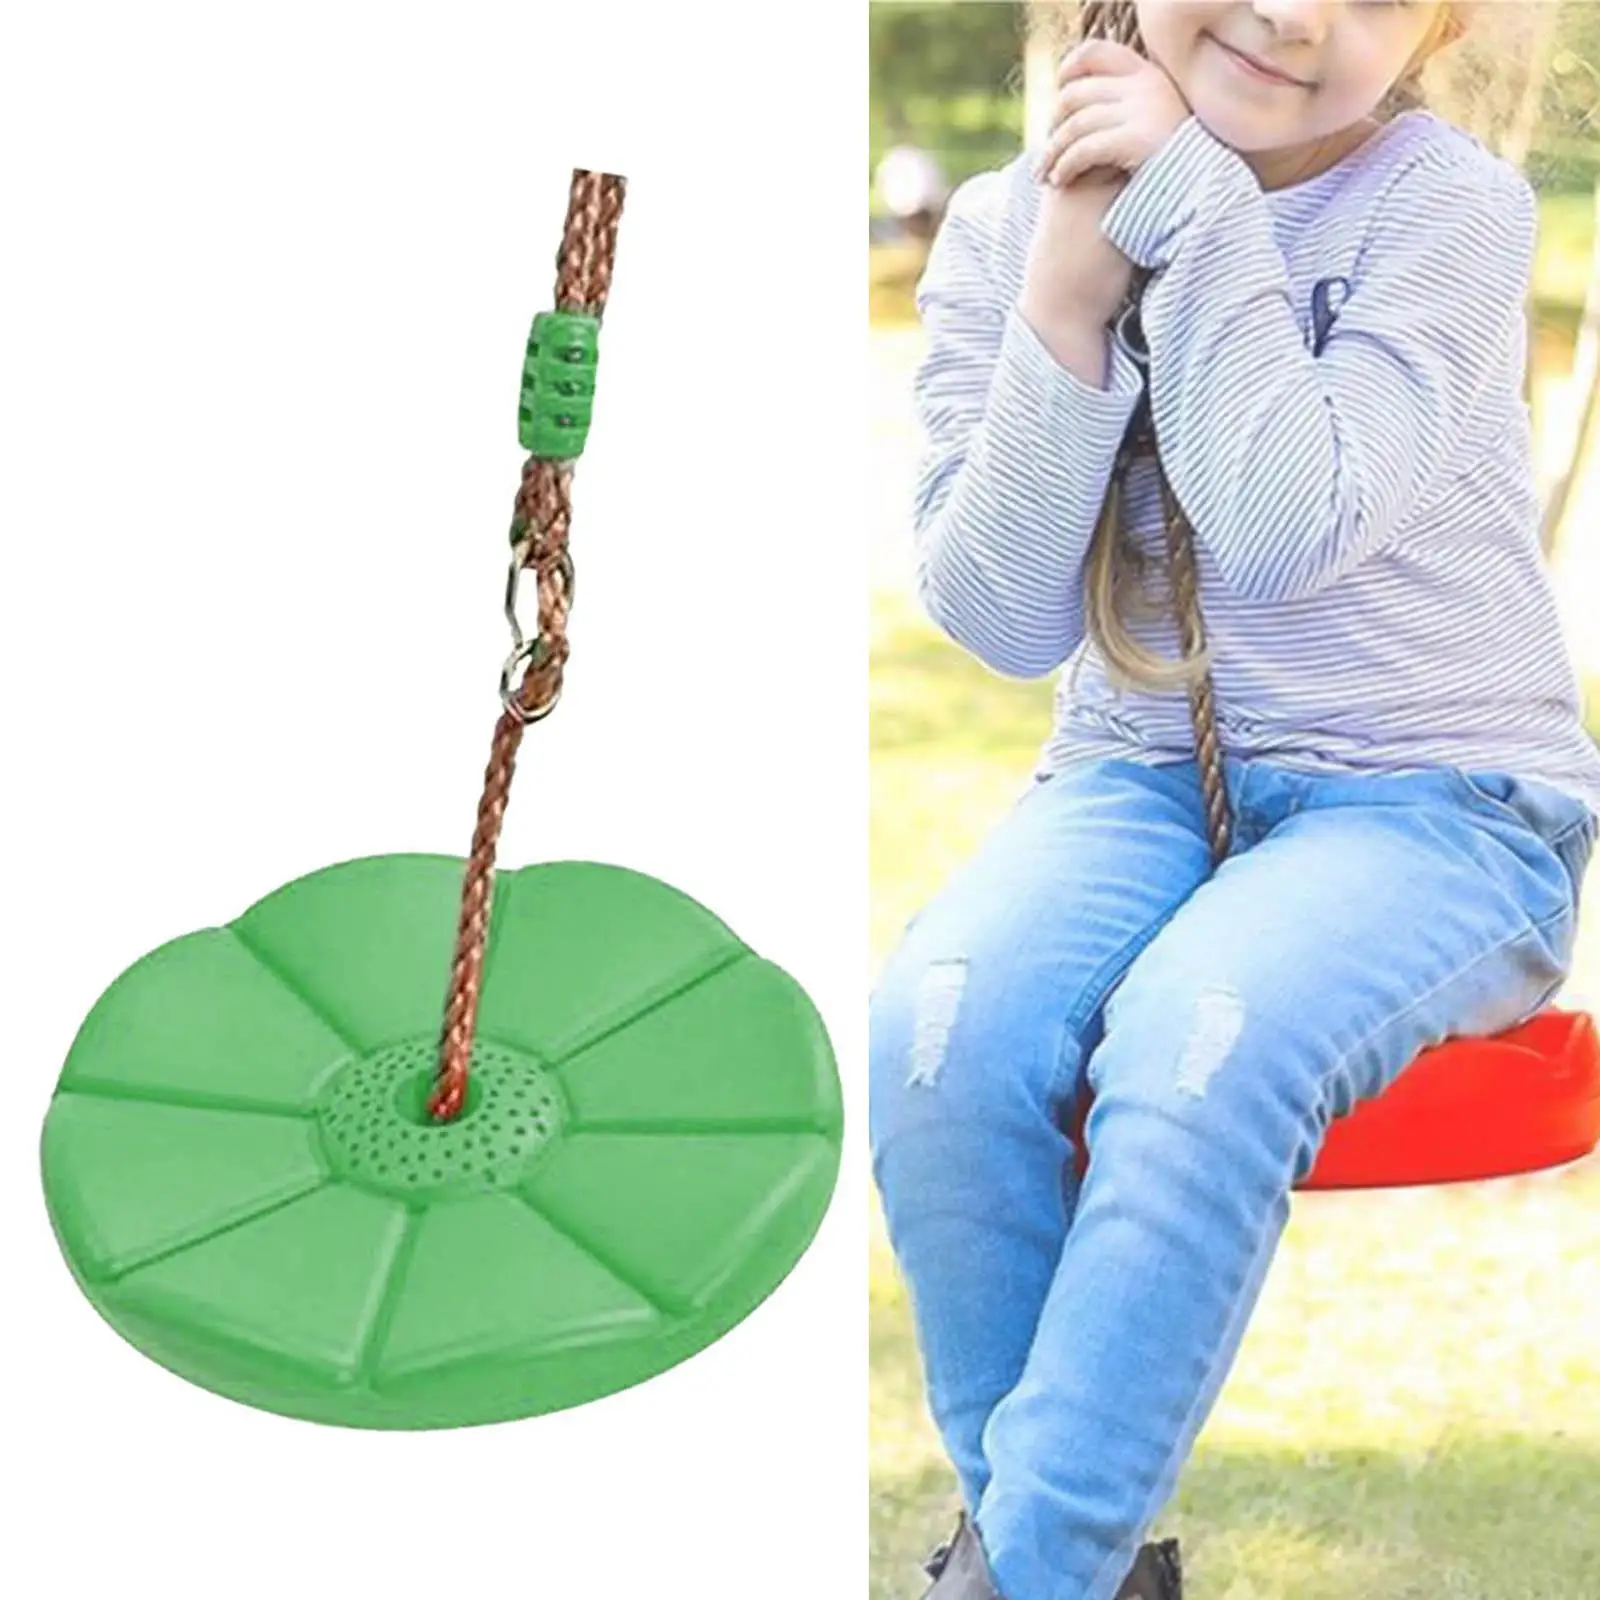 Climbing Rope  Loading 150kg  platforms Kids Disc Swings Seat for Playset Tree House Daily Exercise Outdoor Playground